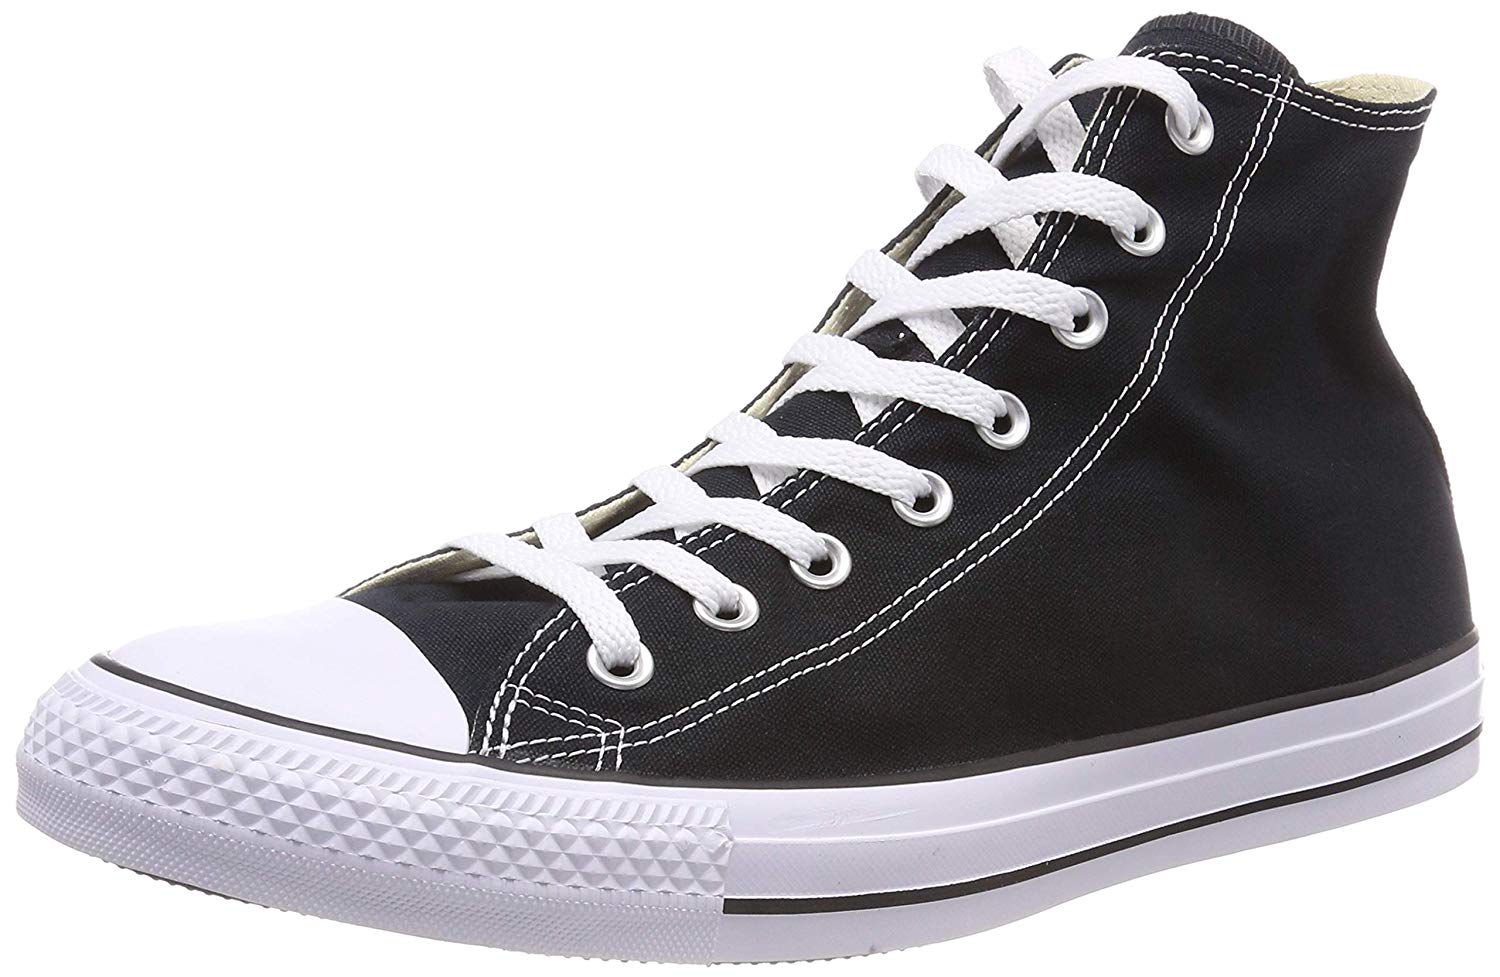 Converse Mens All Star Hi M9160 Hight Top Lace Up Fashion, Black, Size ...